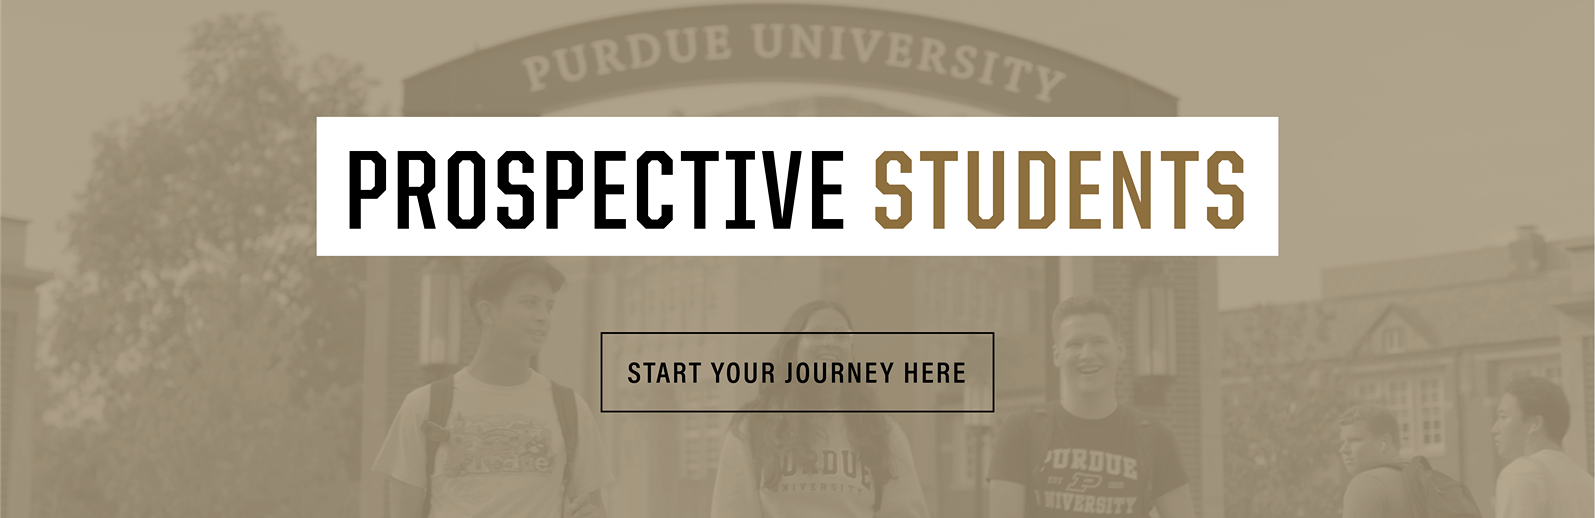 prospective students, start your journey here